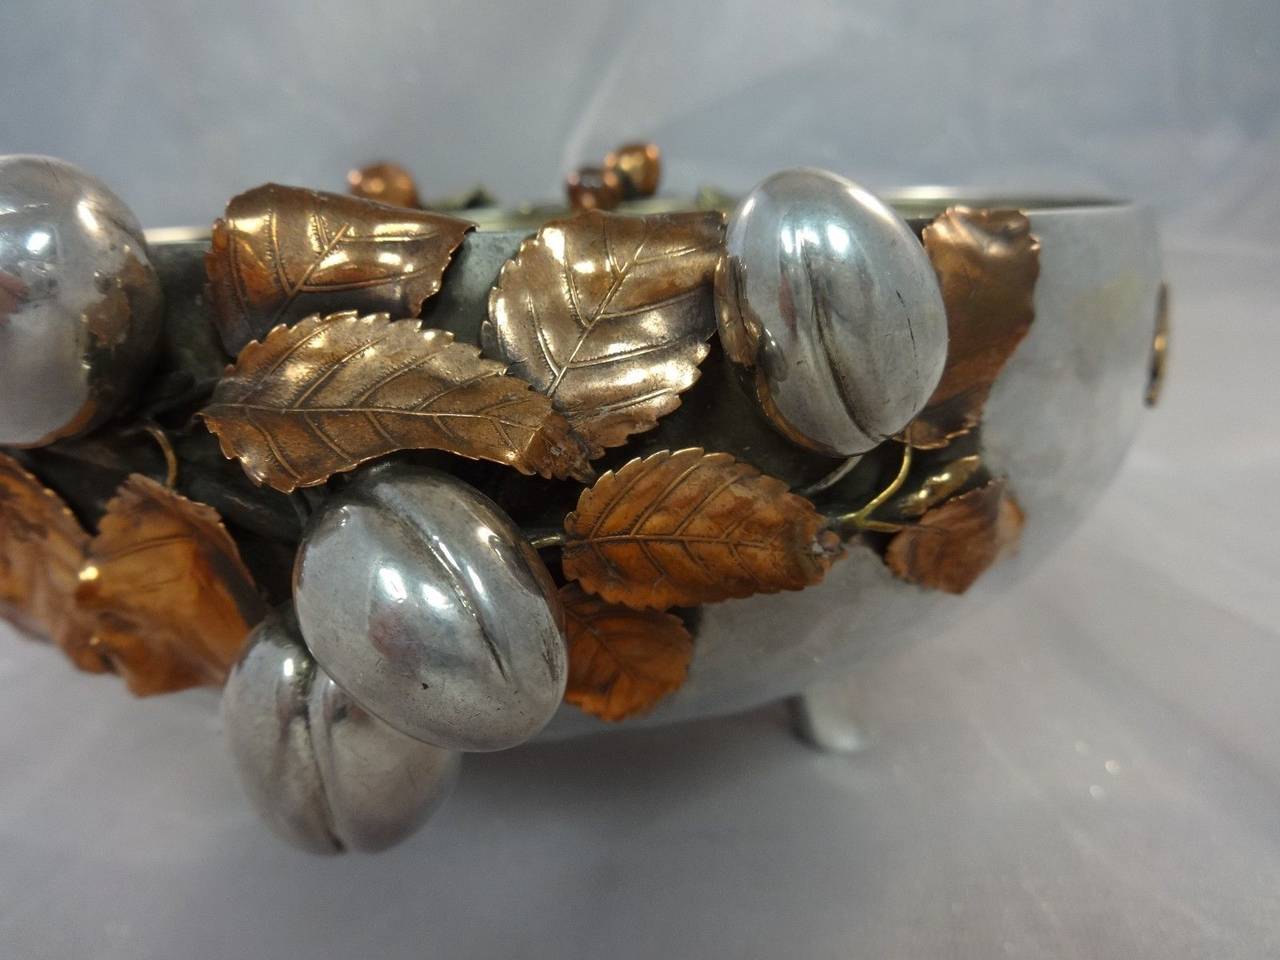 MIXED METALS BY GORHAM

Fabulous Sterling Silver BOWL FOOTED WITH APPLIED STERLING AND COPPER FRUITS, GILT AND COPPER REALISTIC 3-D LEAVES, COPPER ROOSTER, COPPER SWALLOW, AND BUTTERFLY 8 3/8